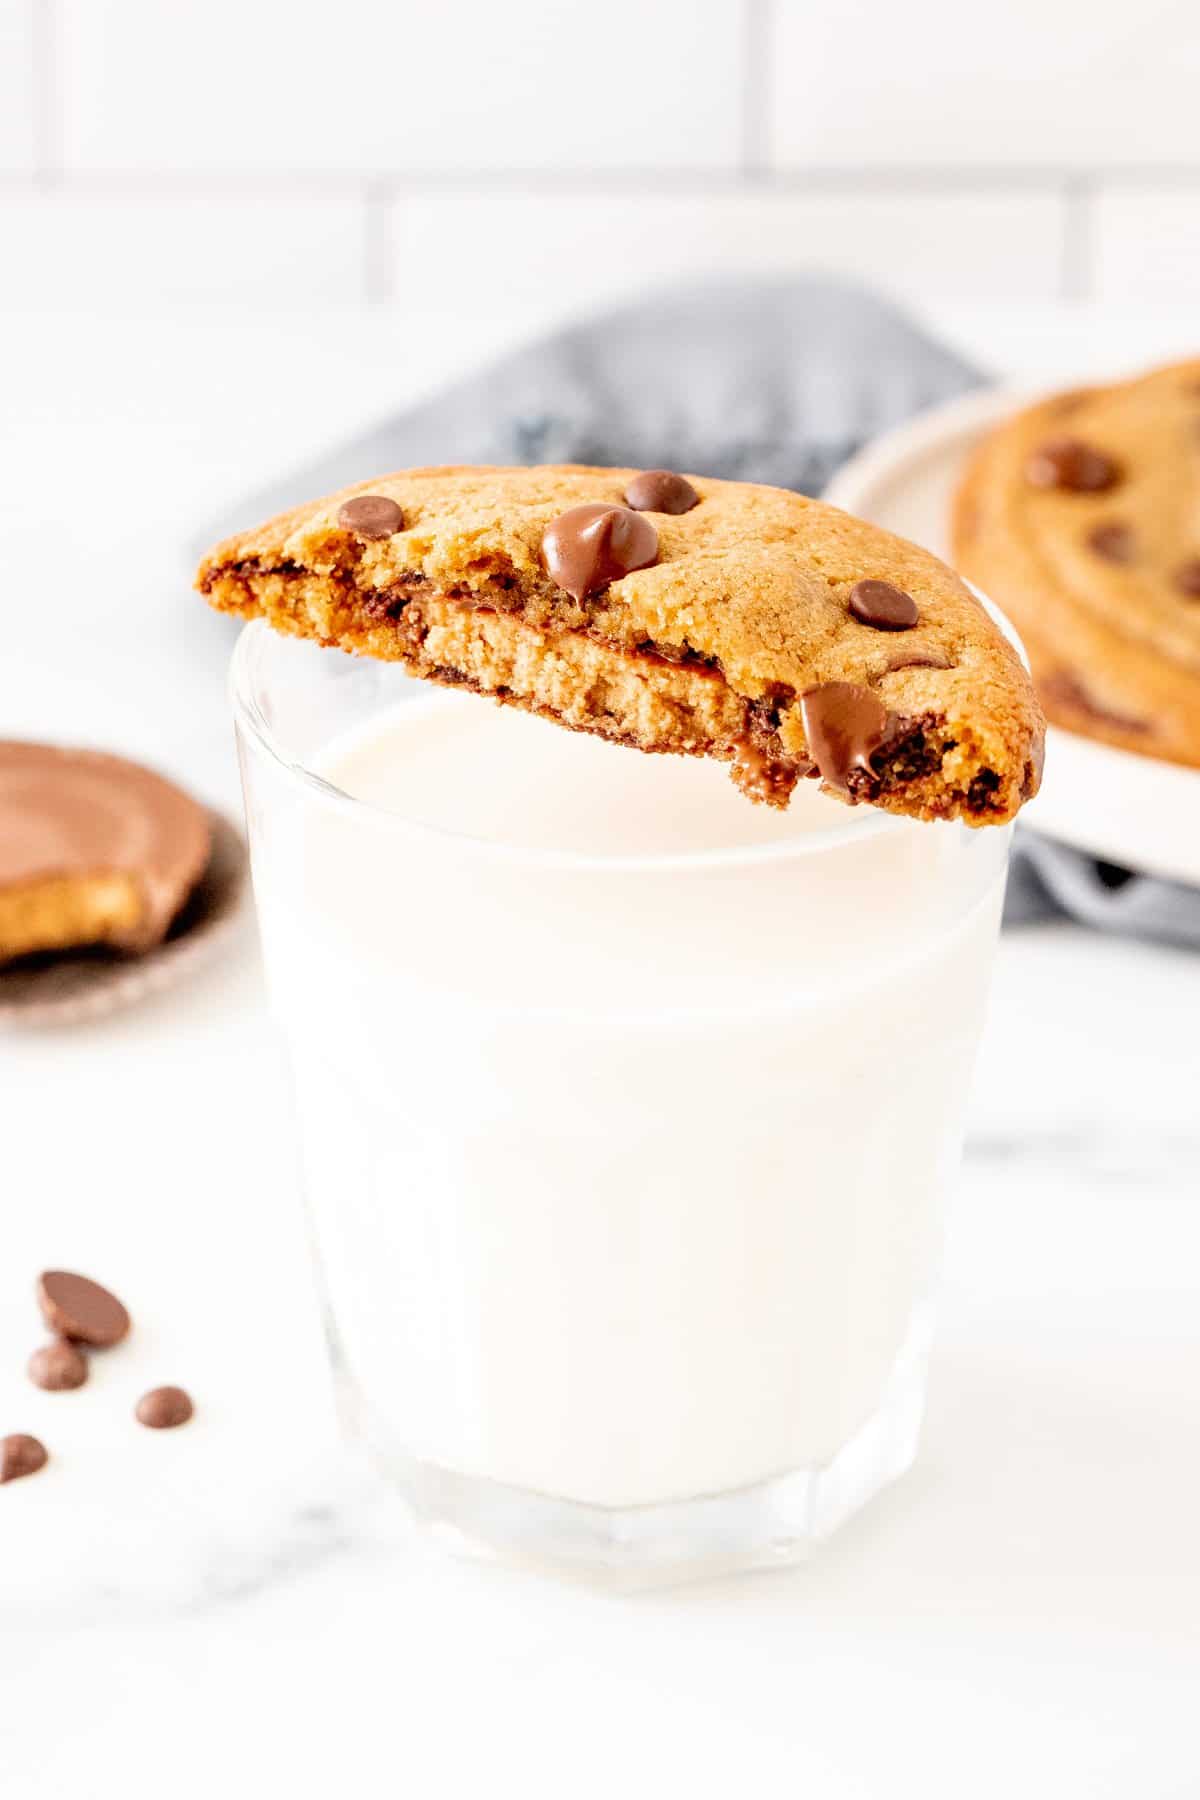 Half of a reese's cookie on top of a glass of milk